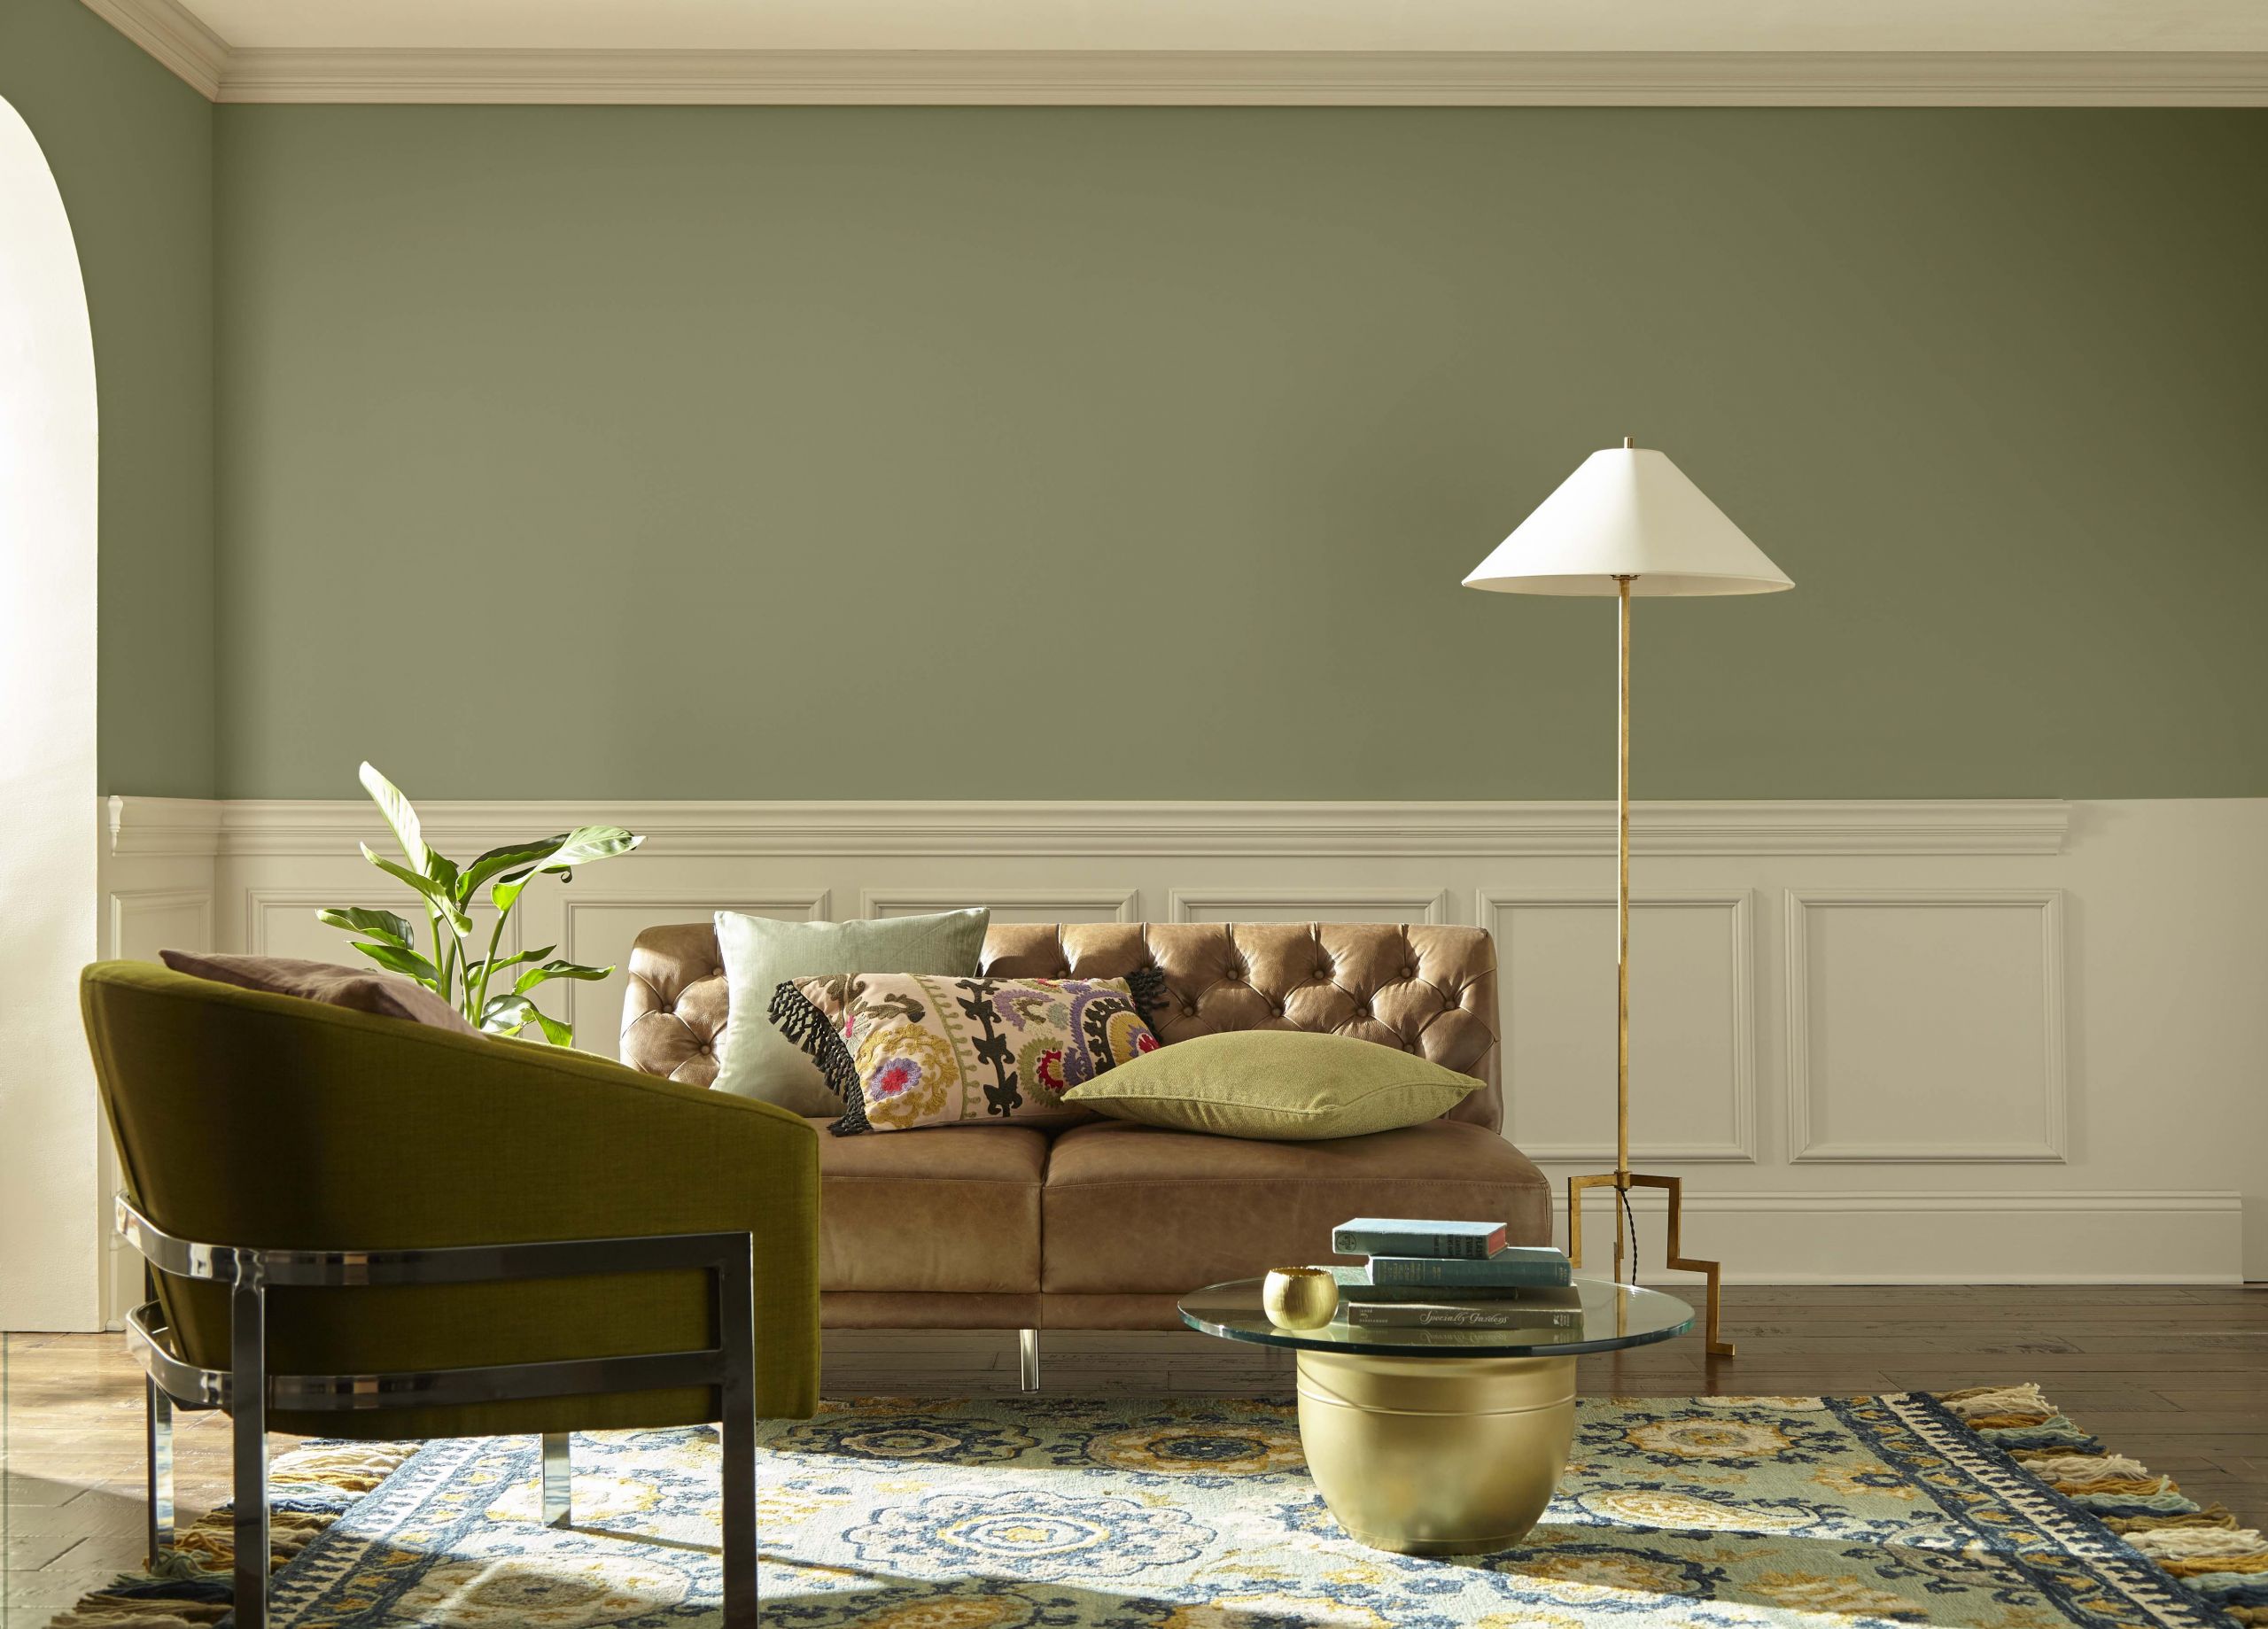 Green Paint For Living Room
 Eight Paint Colors That Will Stand the Test of Time